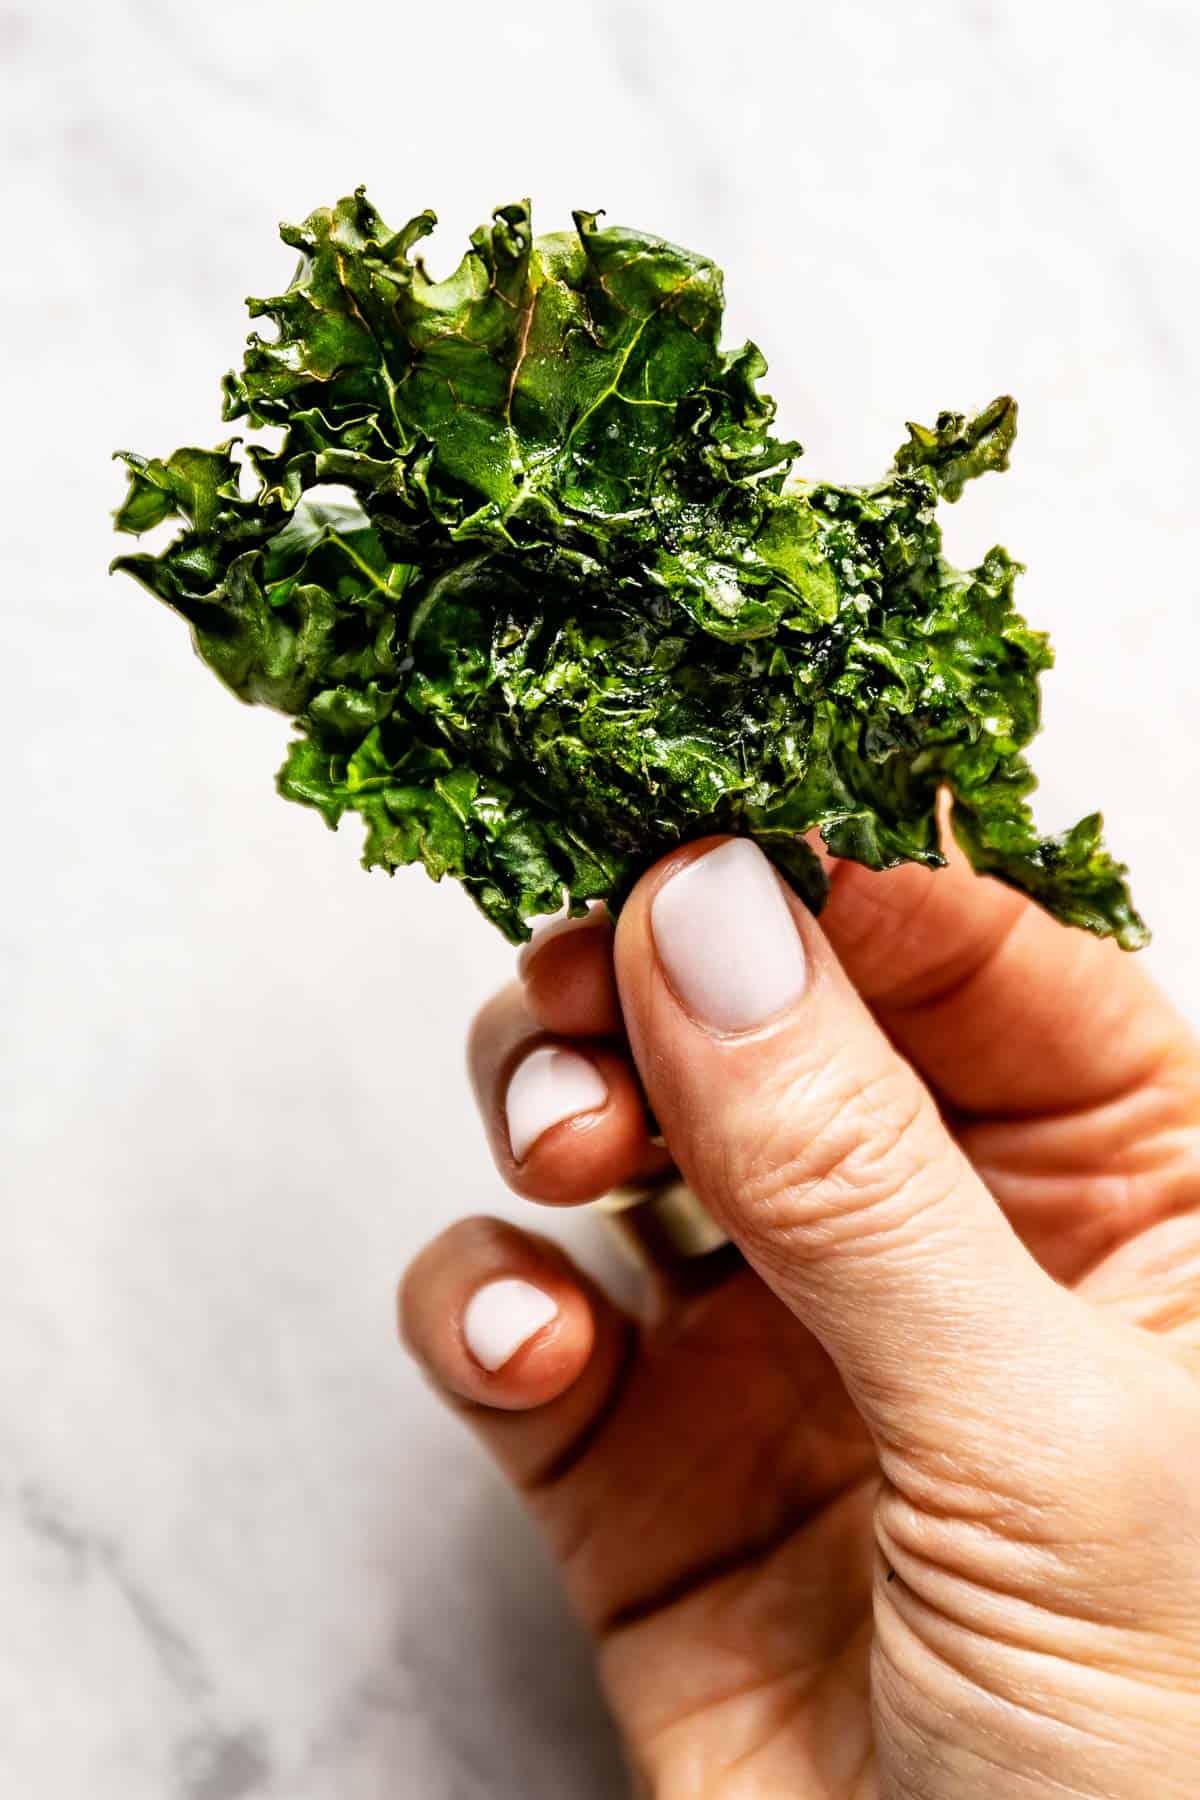 A person holding an air-fried kale chip from the top view.